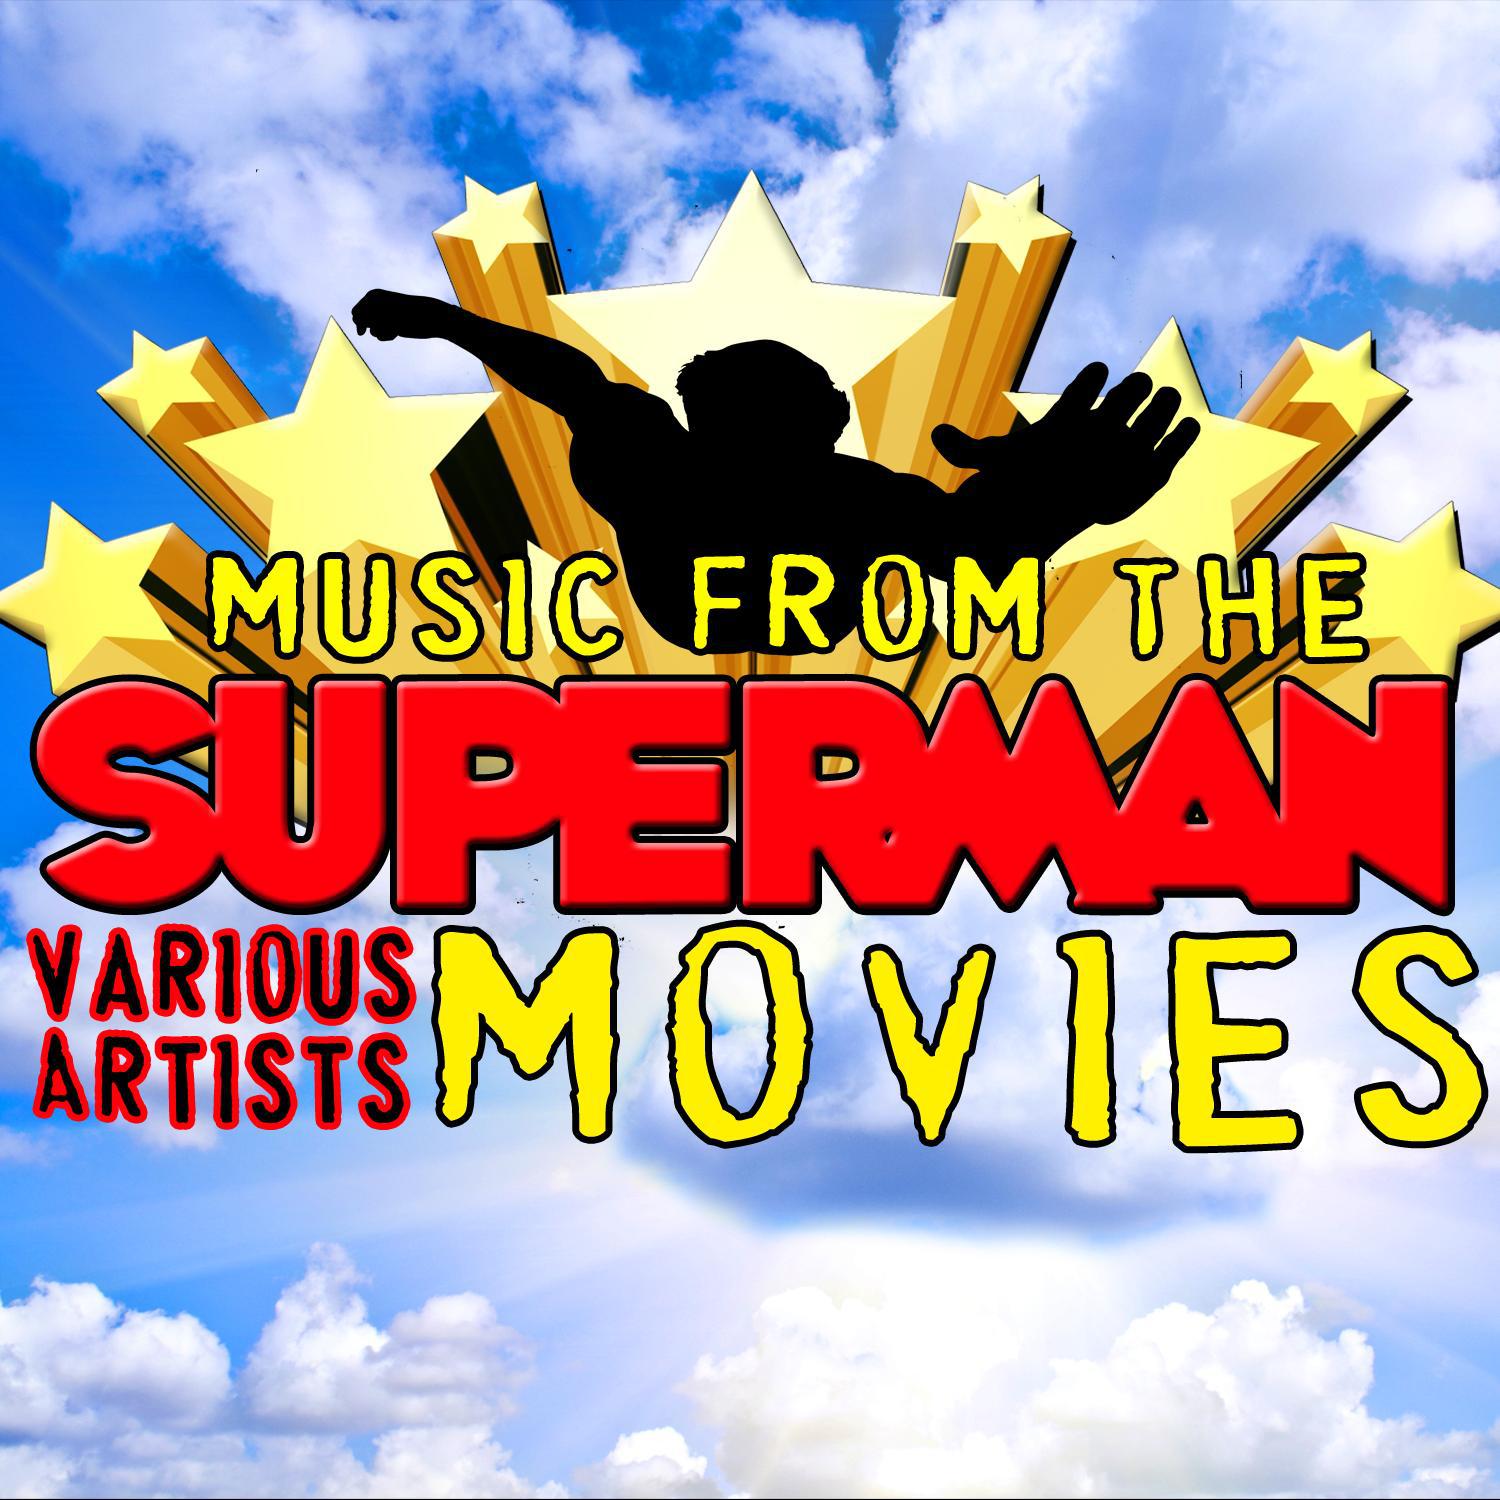 Music from the Superman Movies